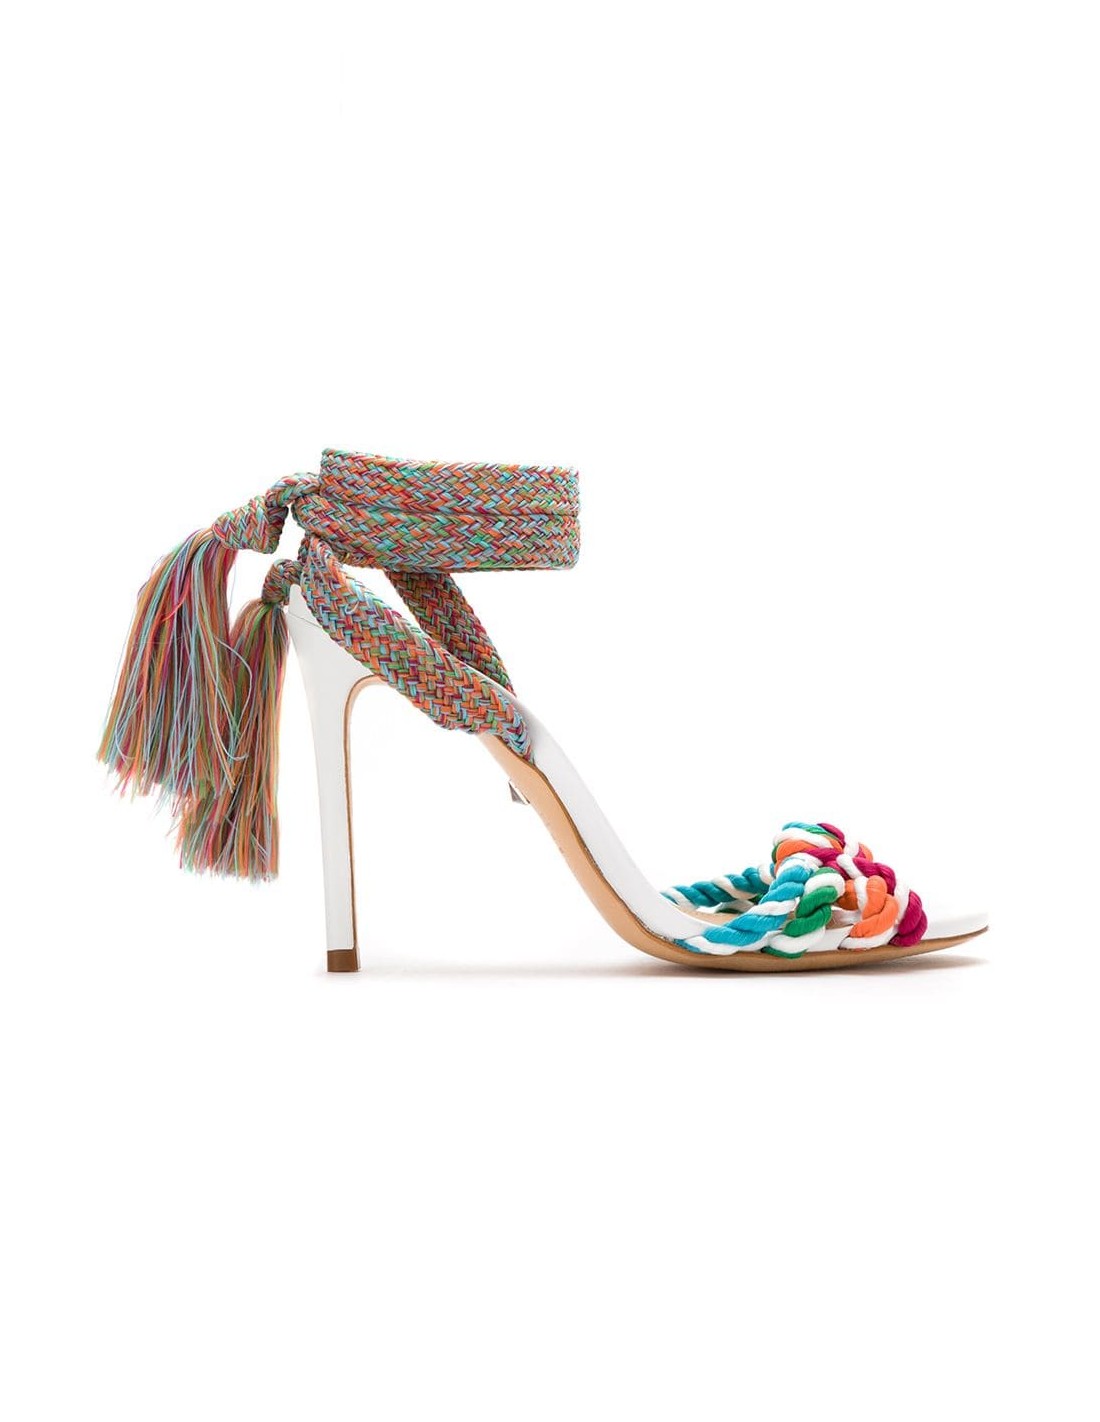 Schutz Sandals with Heel, Strings and Knots